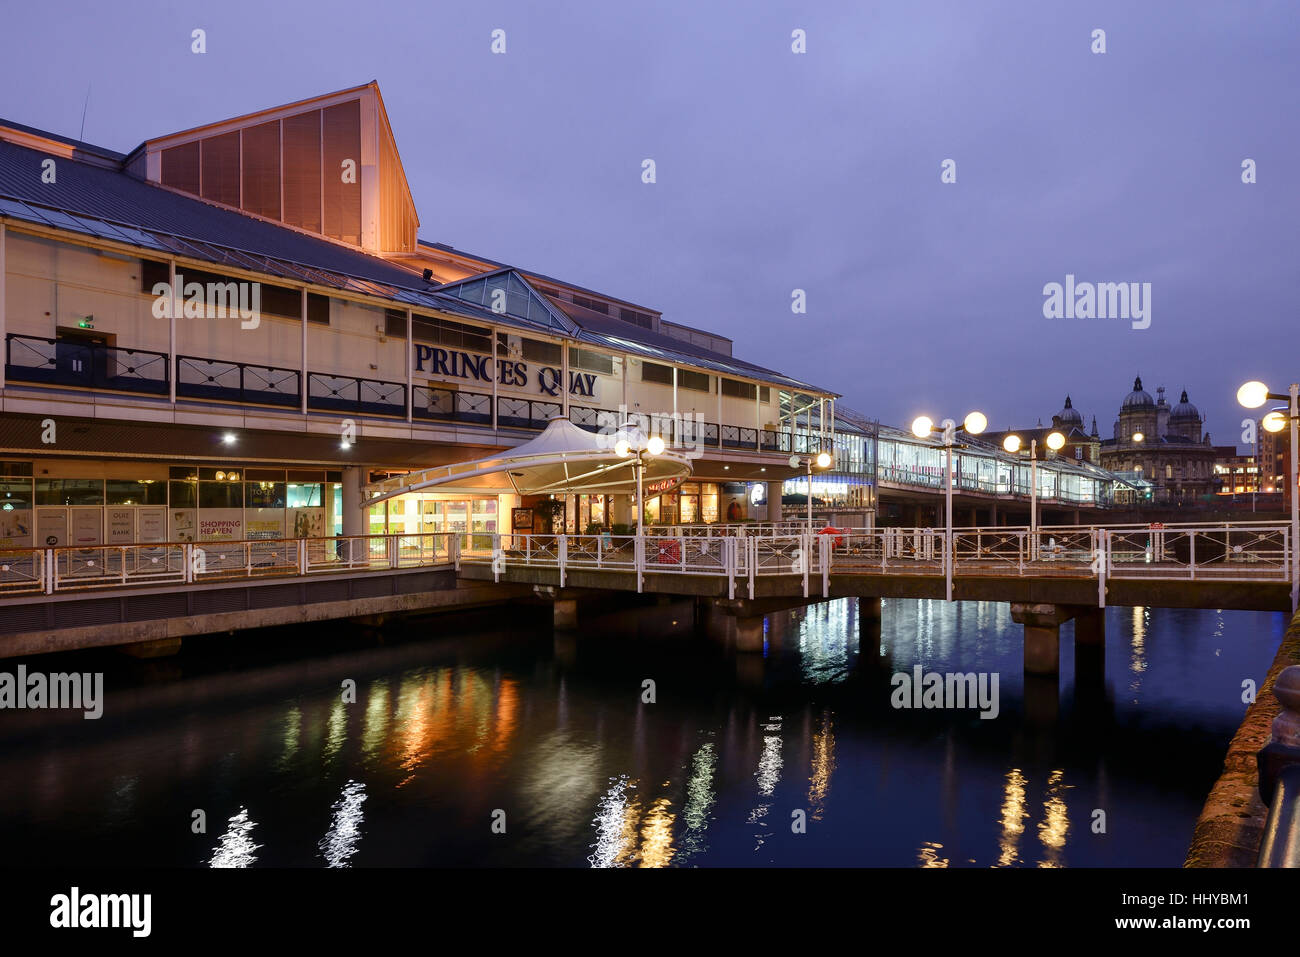 The Princess Quay shopping centre in Hull city centre at dusk Stock Photo